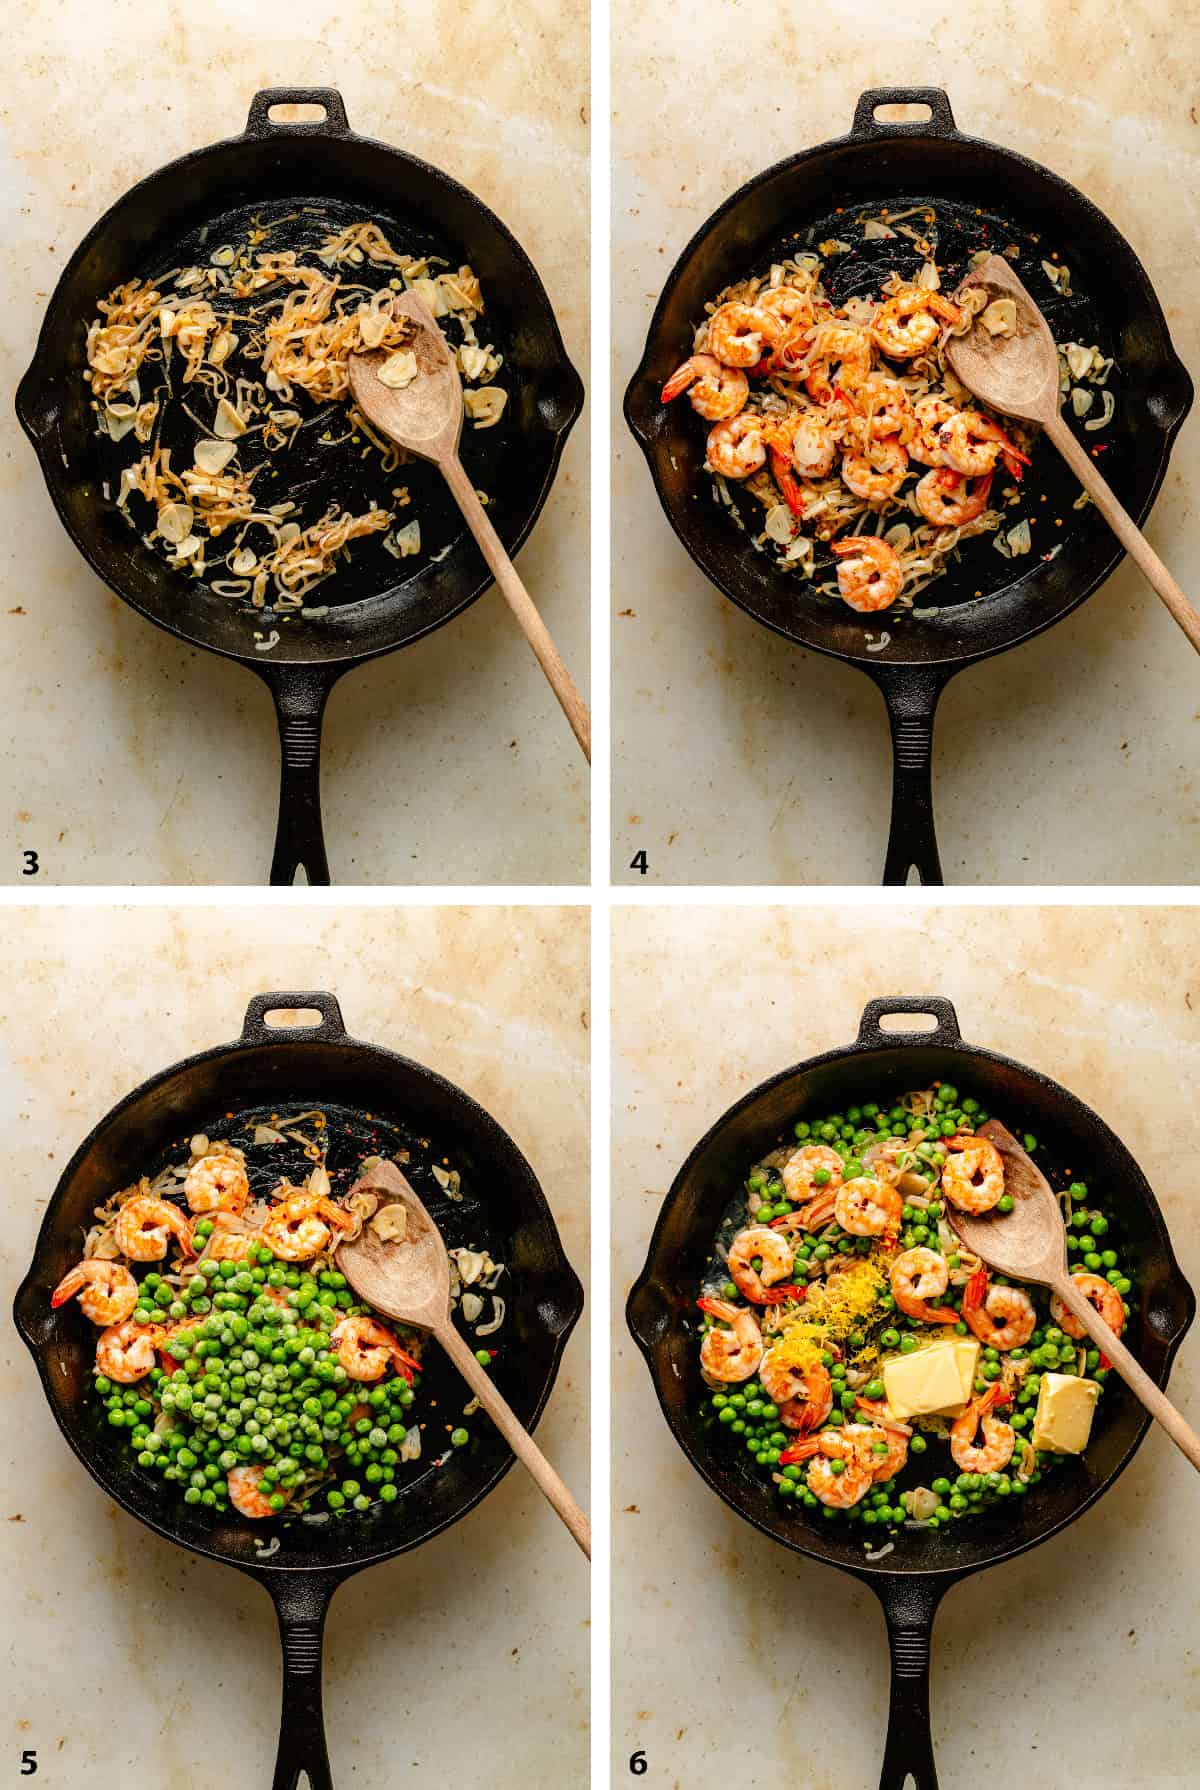 Process of creating the lemon garlic shrimp pasta sauce with the veggies and butter.